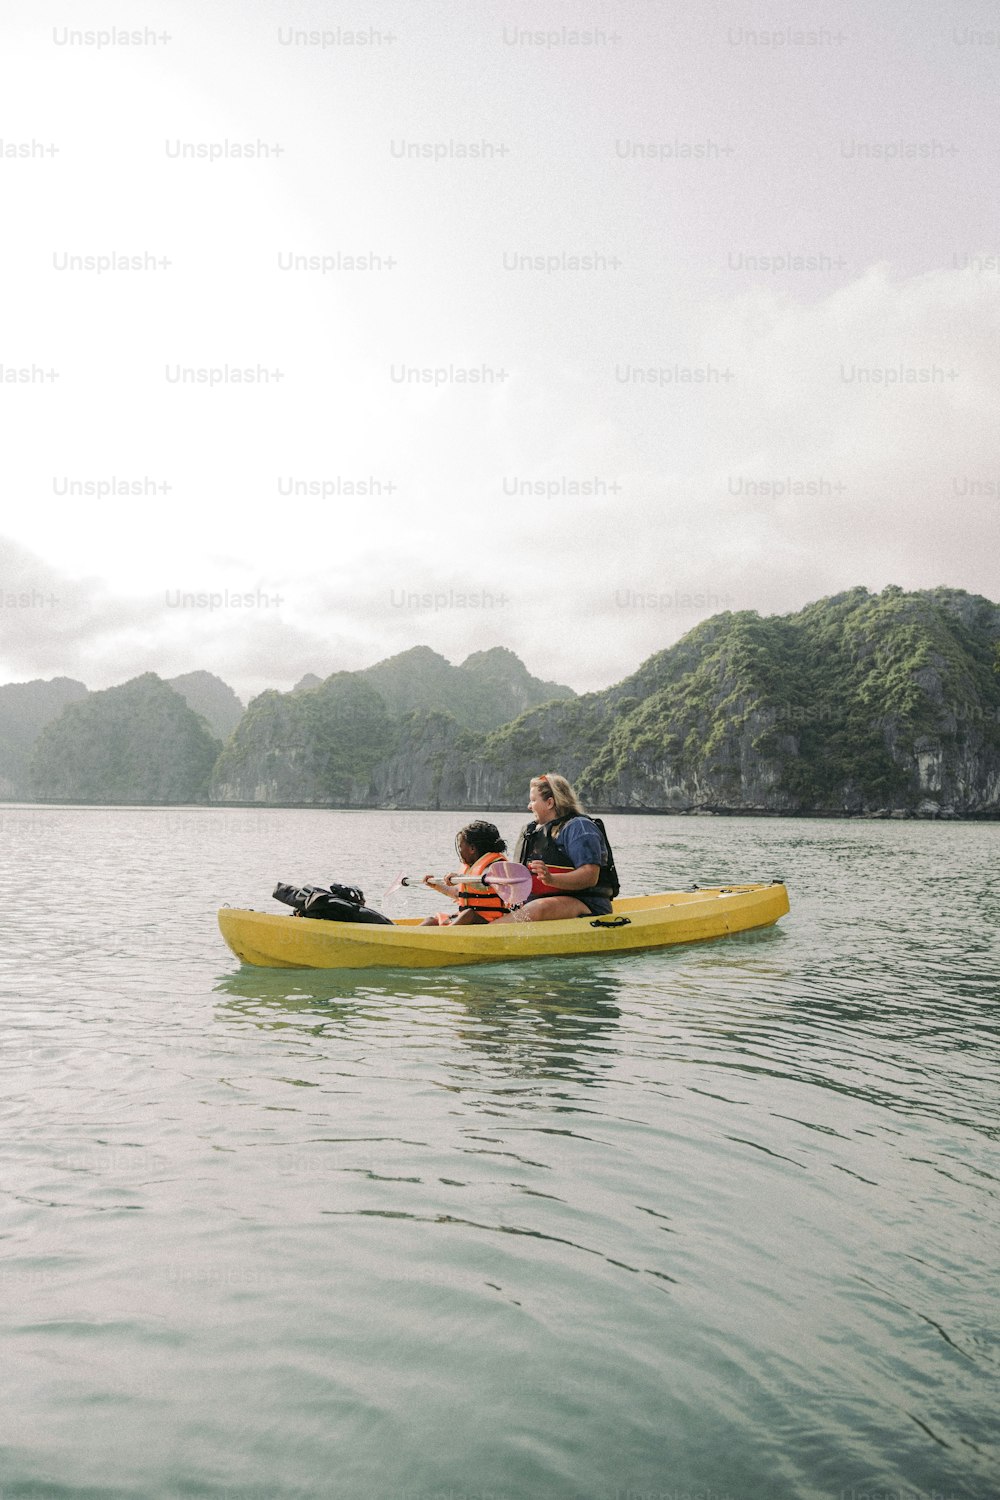 a woman and two children in a yellow kayak